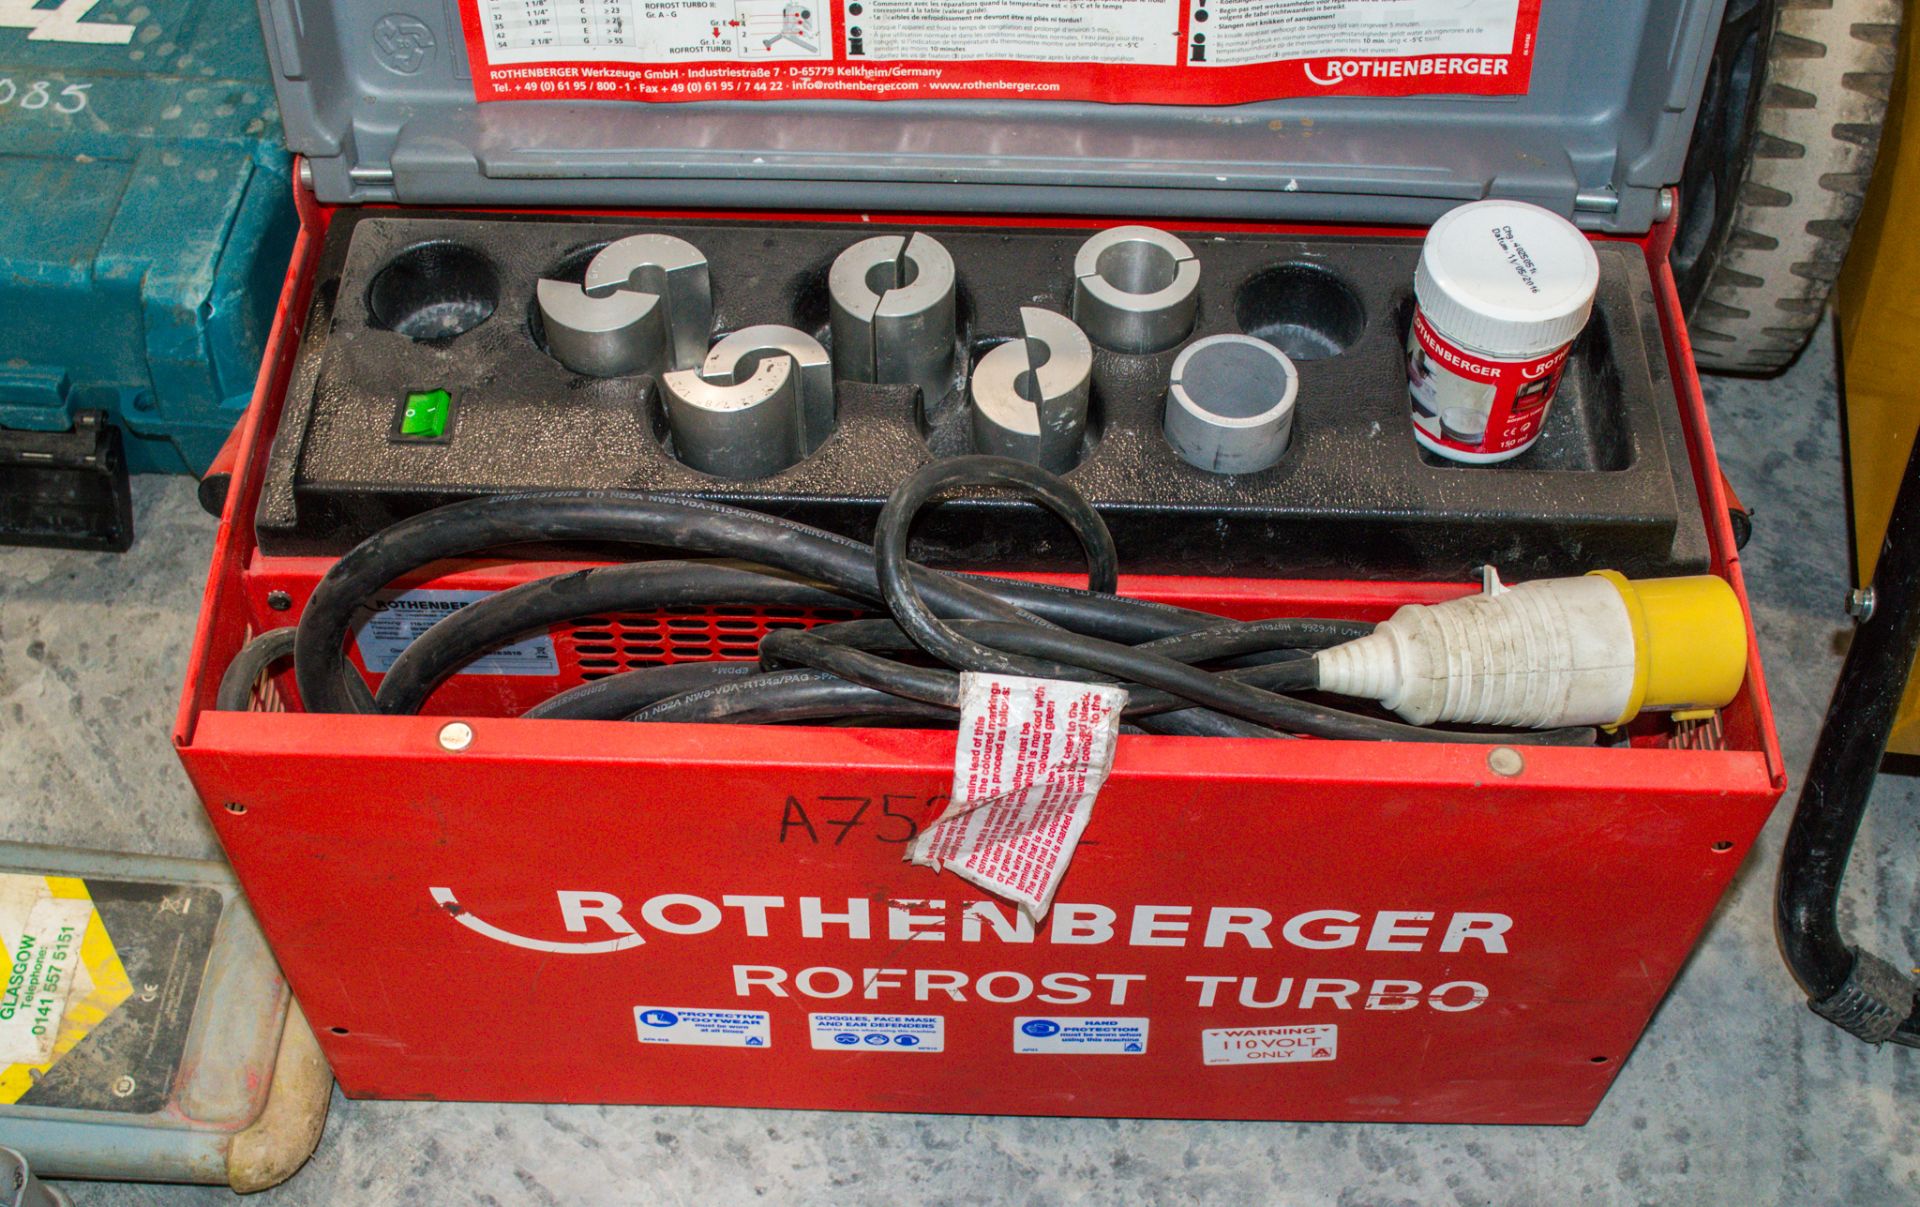 Rothenberger ro- frost turbo pipe freezing kit A752162